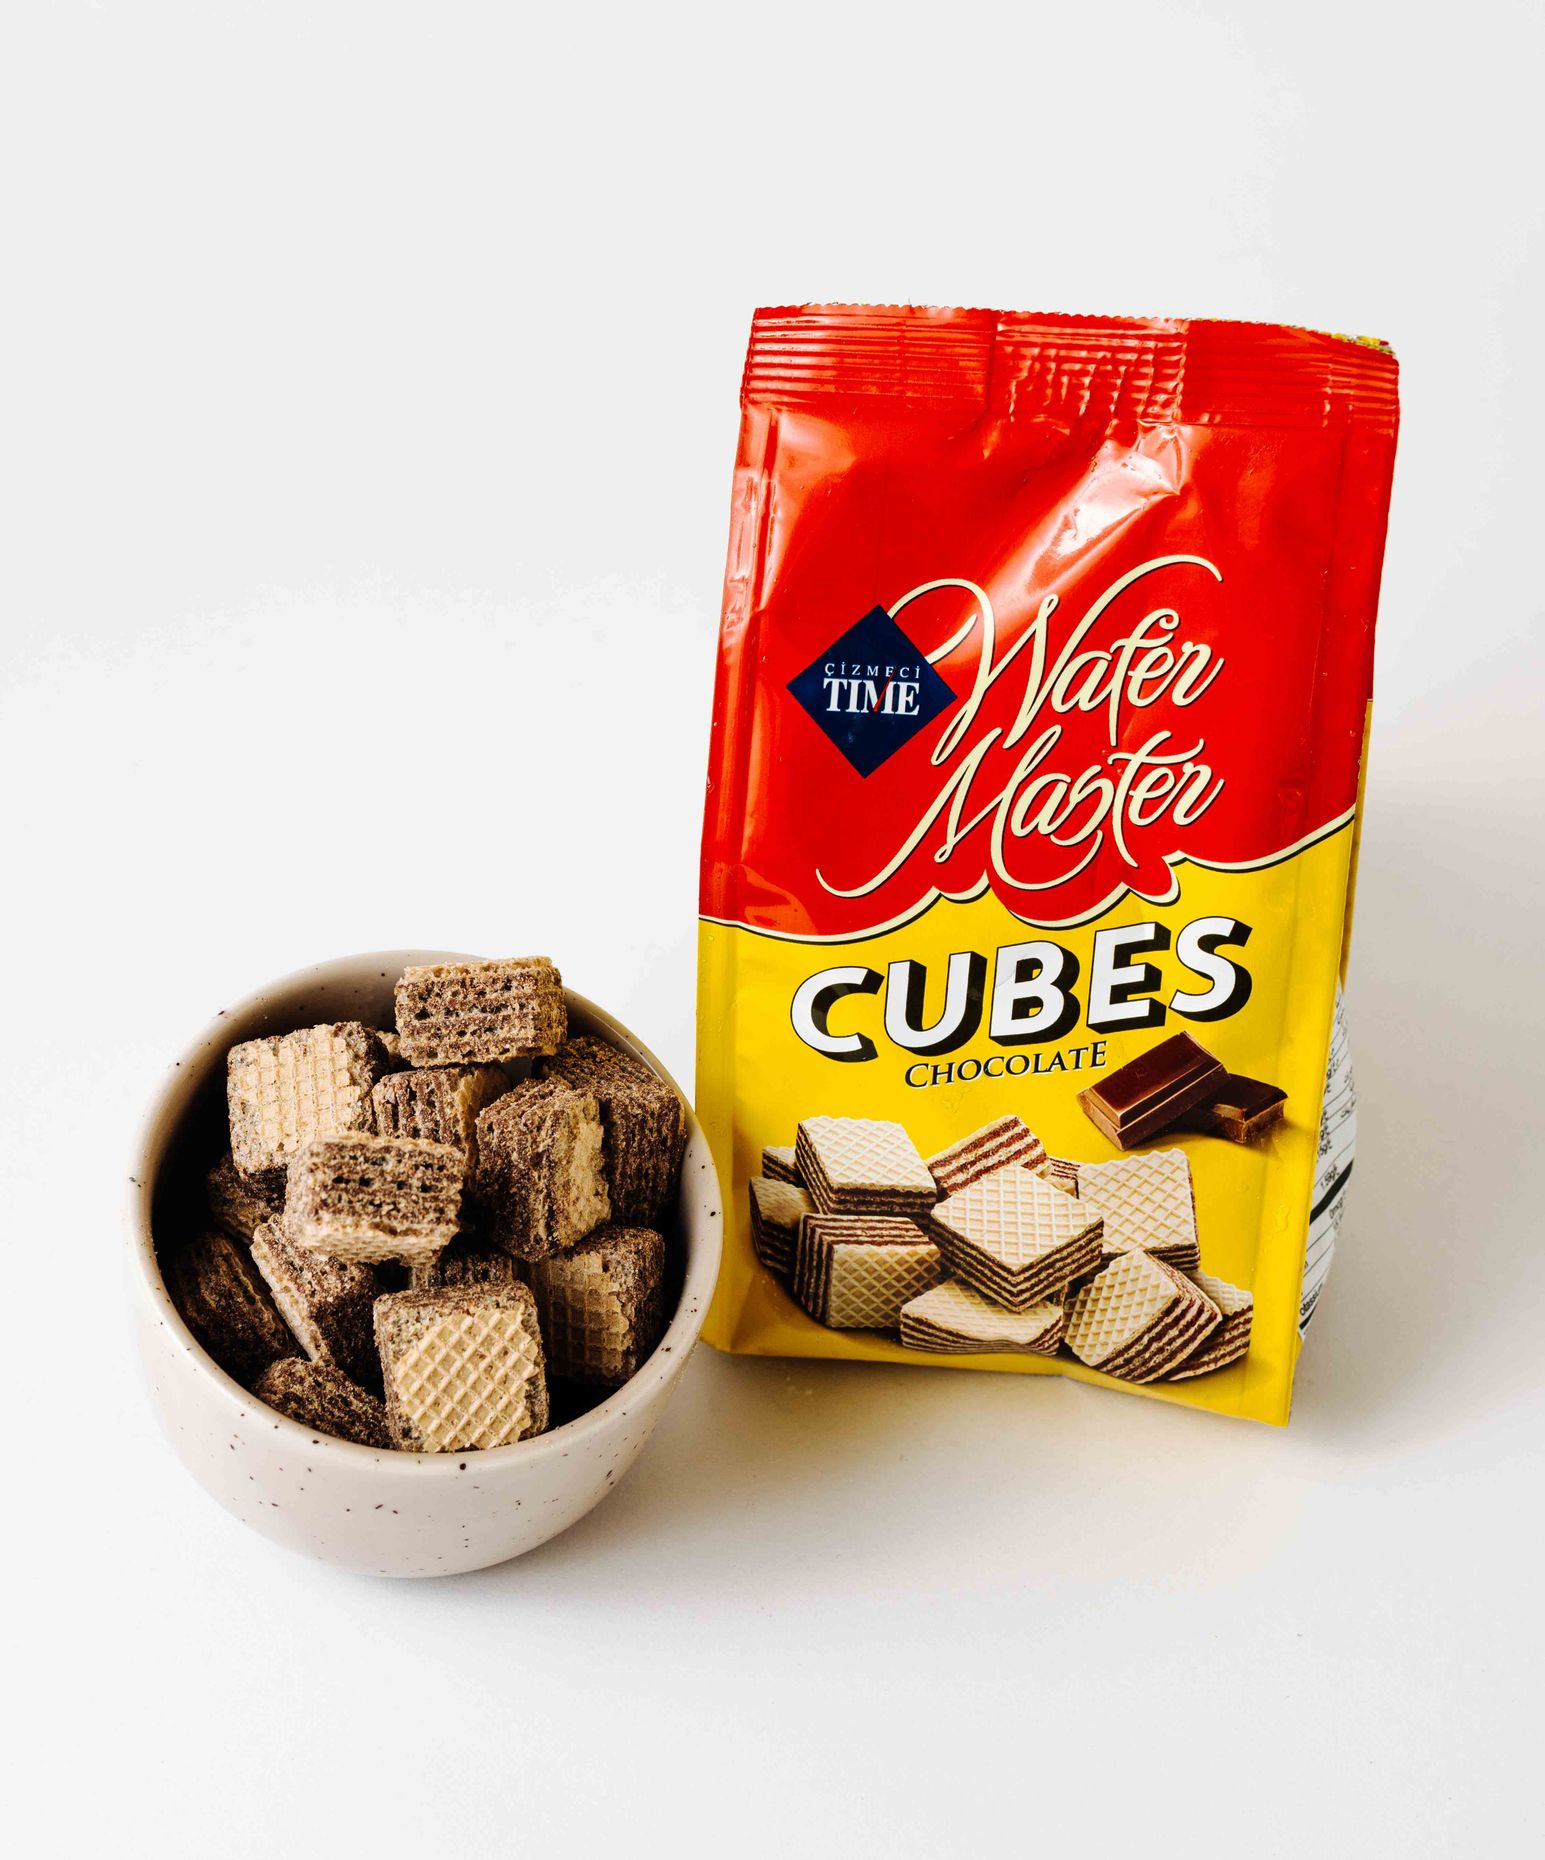 Wafer Master Chocolate Cubes